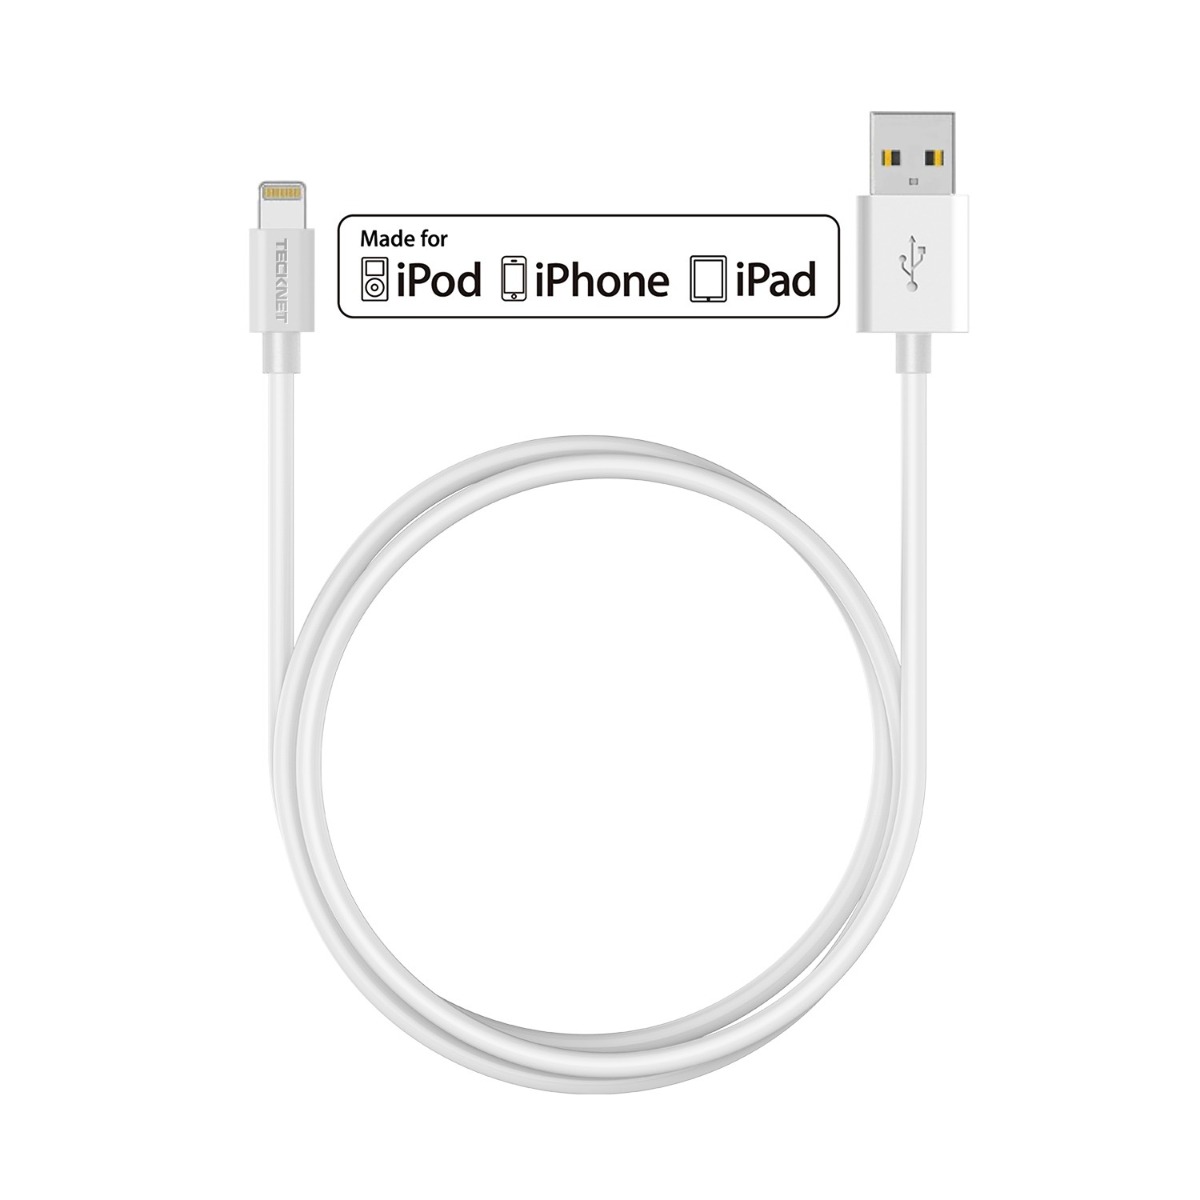 Iphone USB Cable